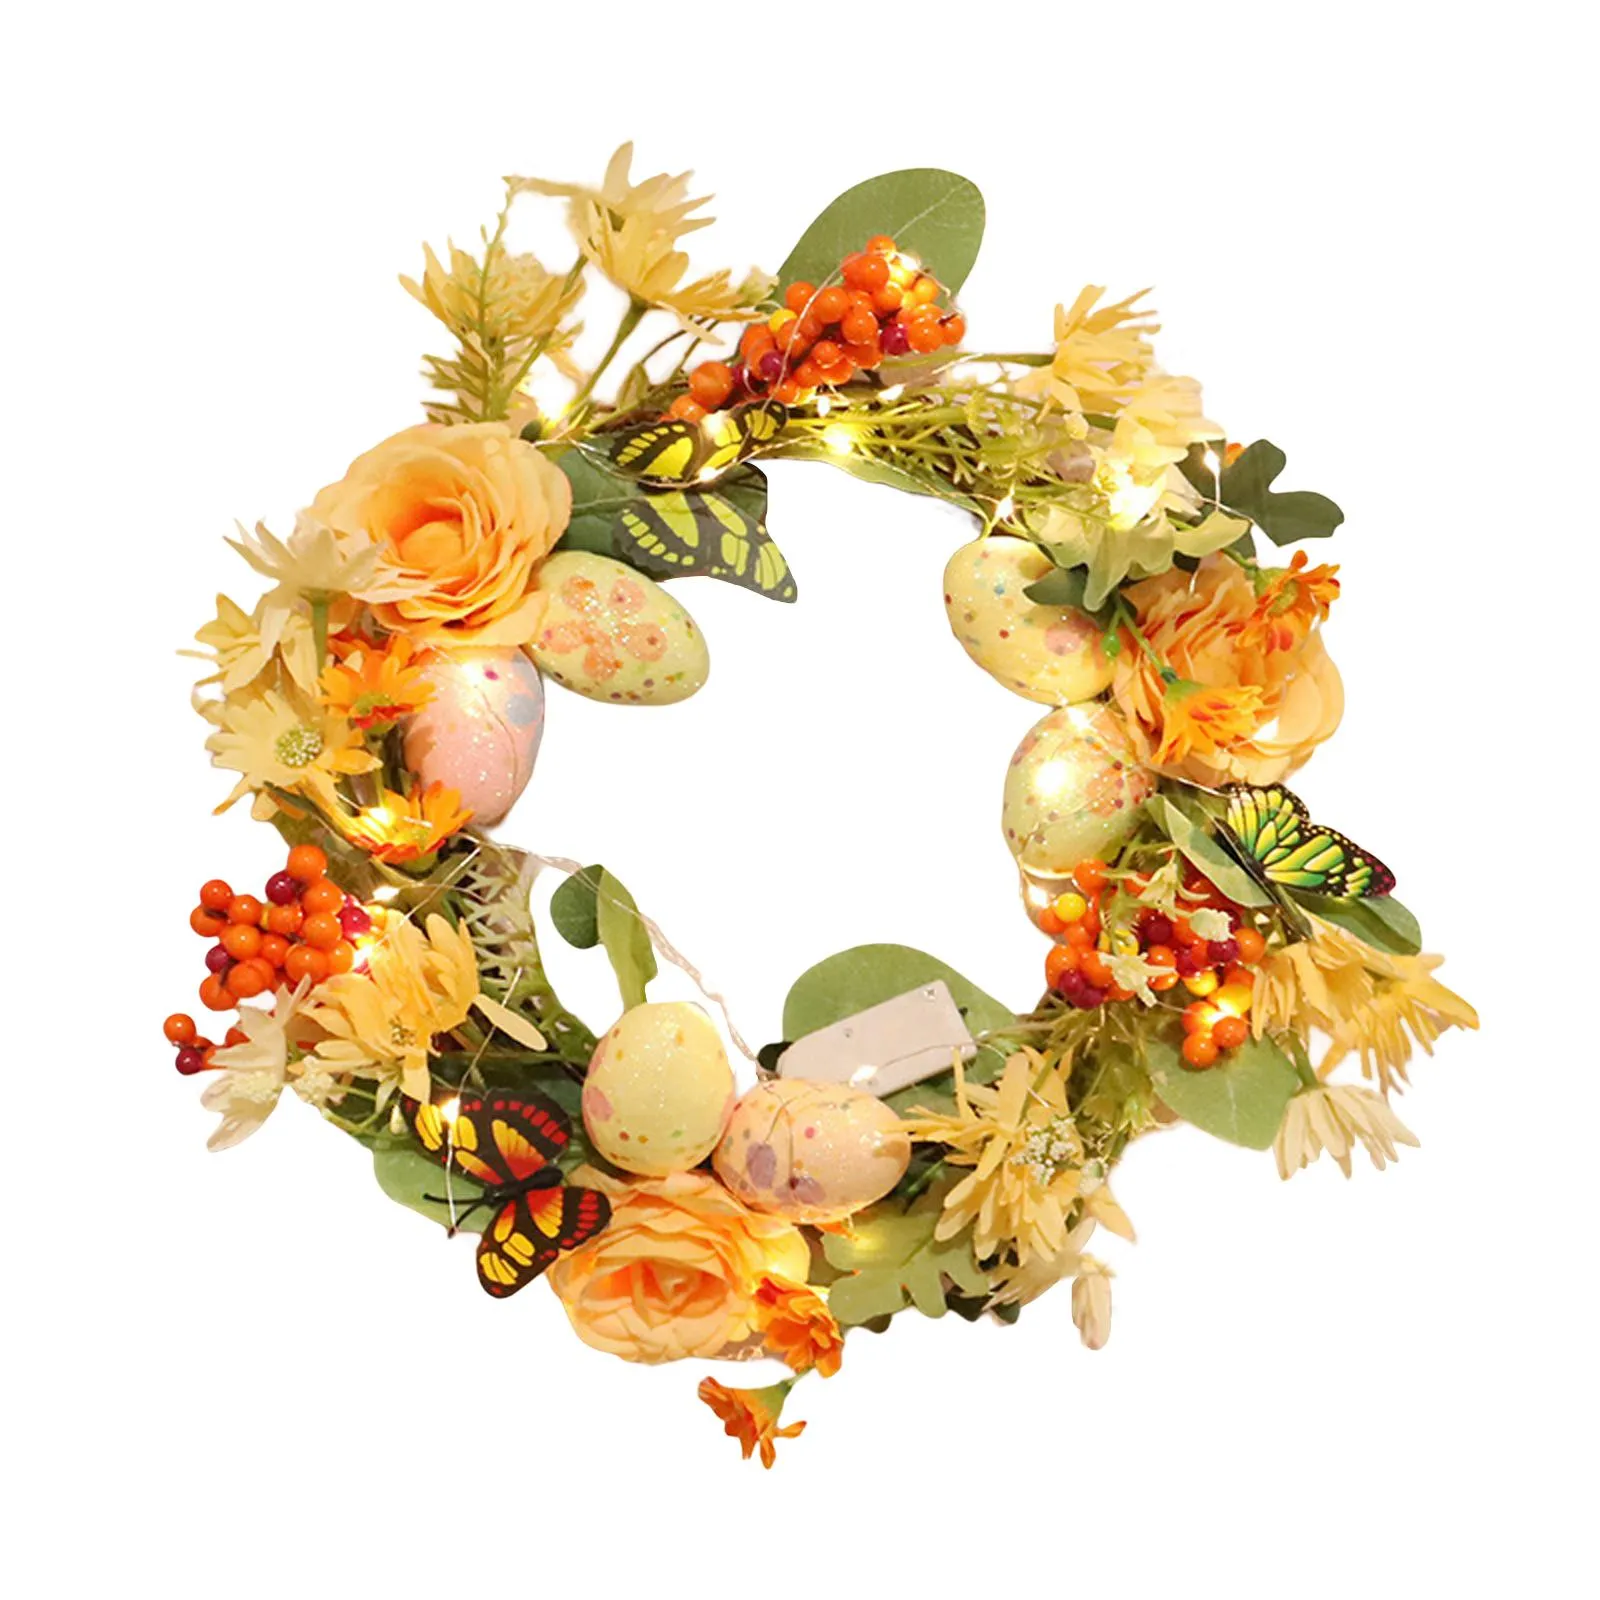 Lighted Easter Wreath Front Door Wreath Flowers Wreaths for Photo Prop Party Spring